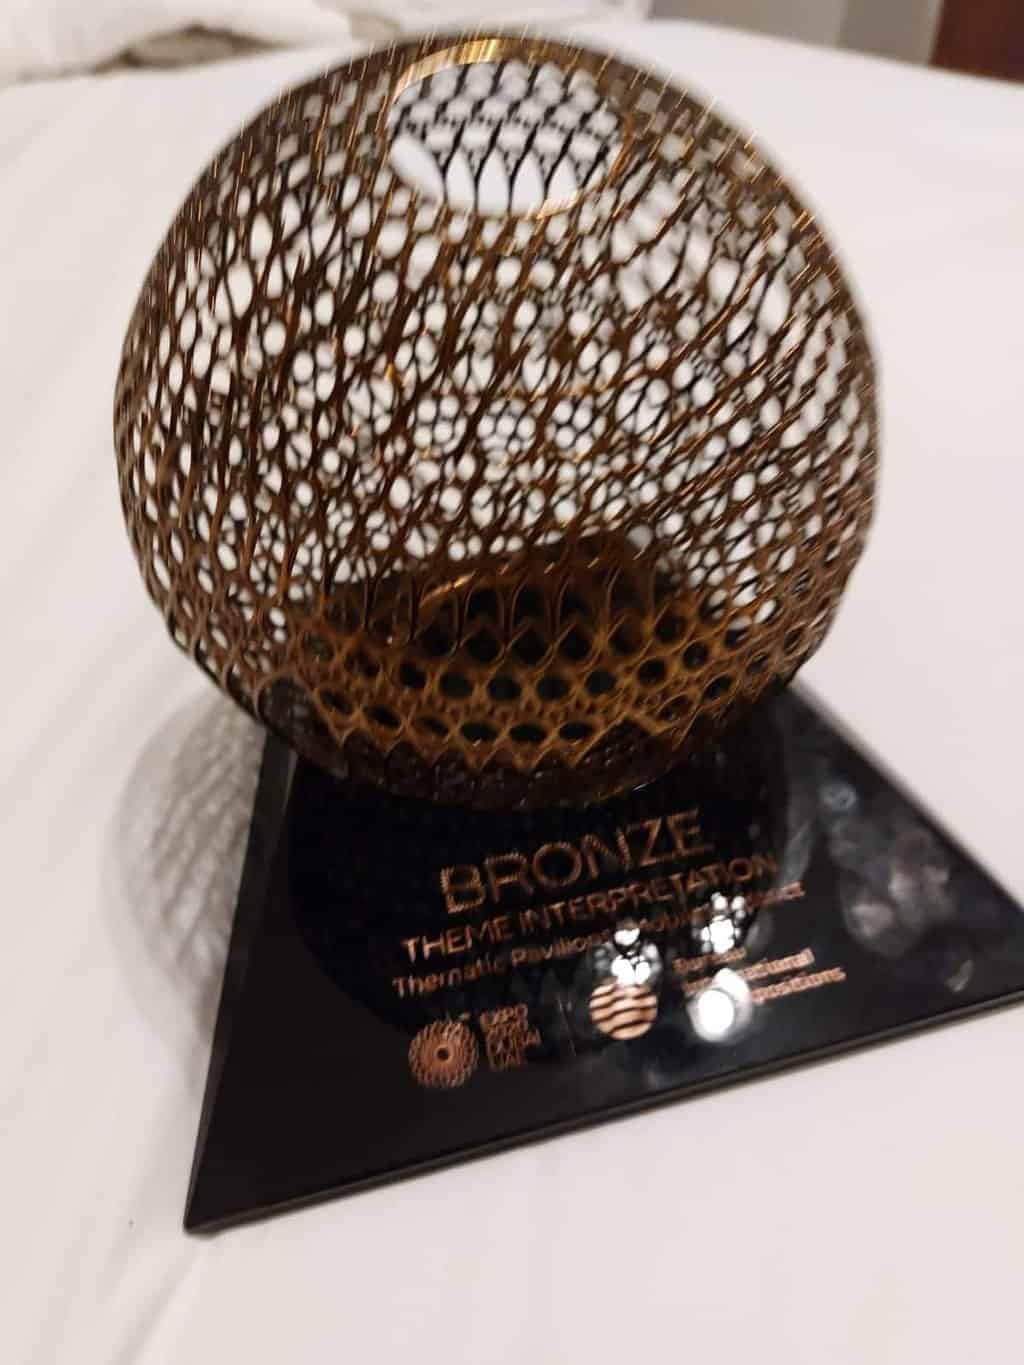 OIC Pavilion in Expo 2020 Dubai received a bronze award during the Bureau International des Expositions (BIE) in Dubai on 30 March 2022 category  thematic Development “Iqra”.